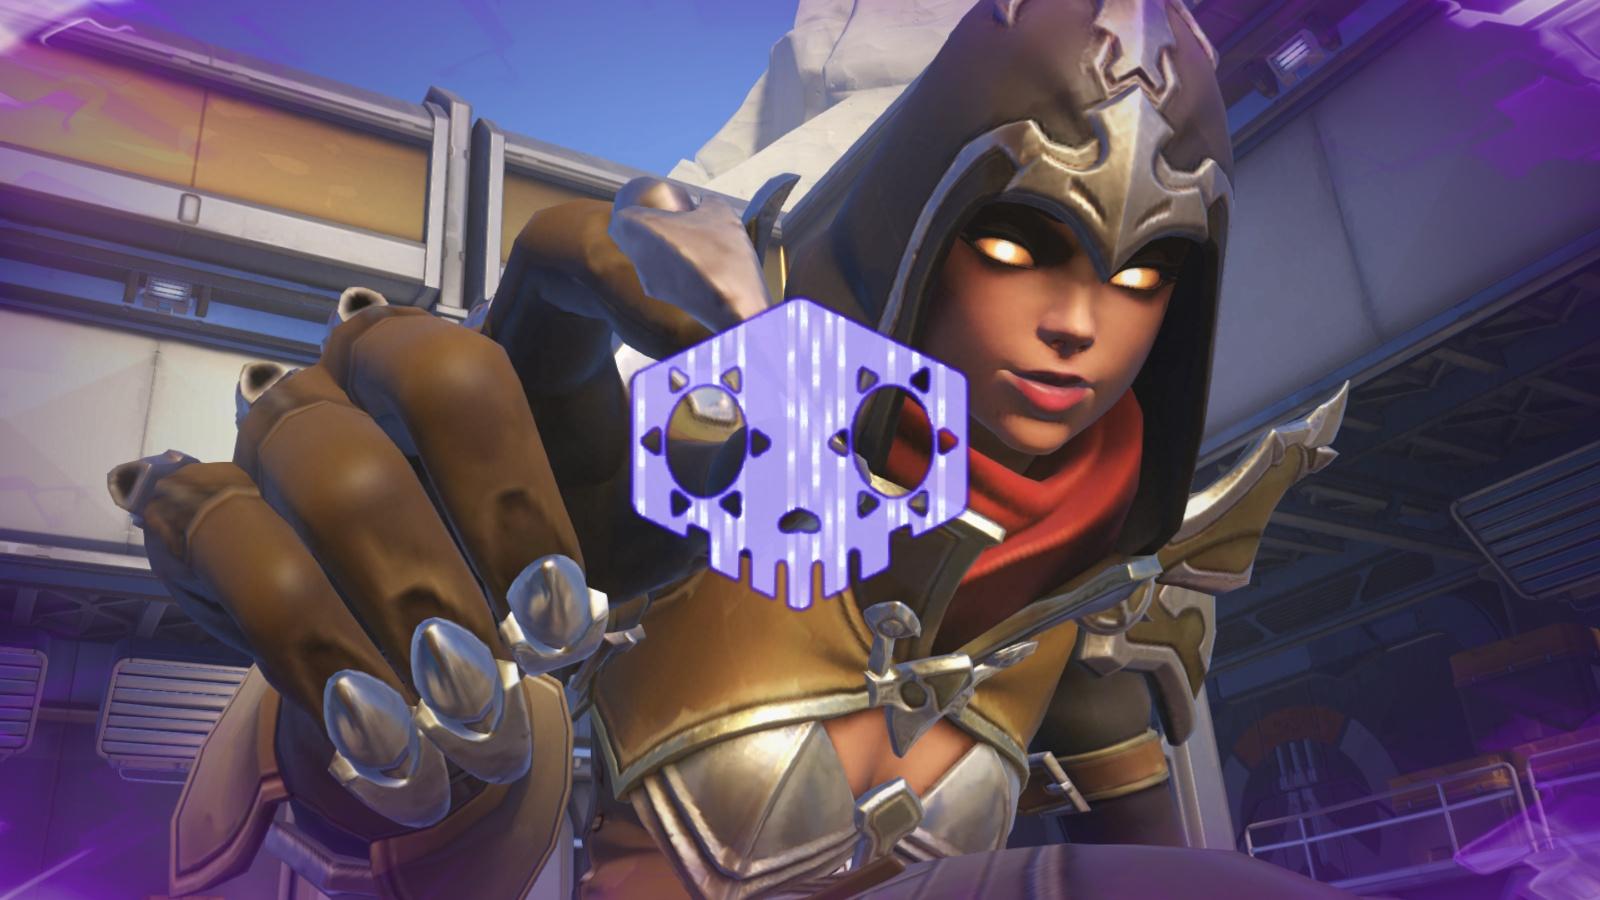 A screenshot featuring Sombra taken from one of her highlights in Overwatch 2.